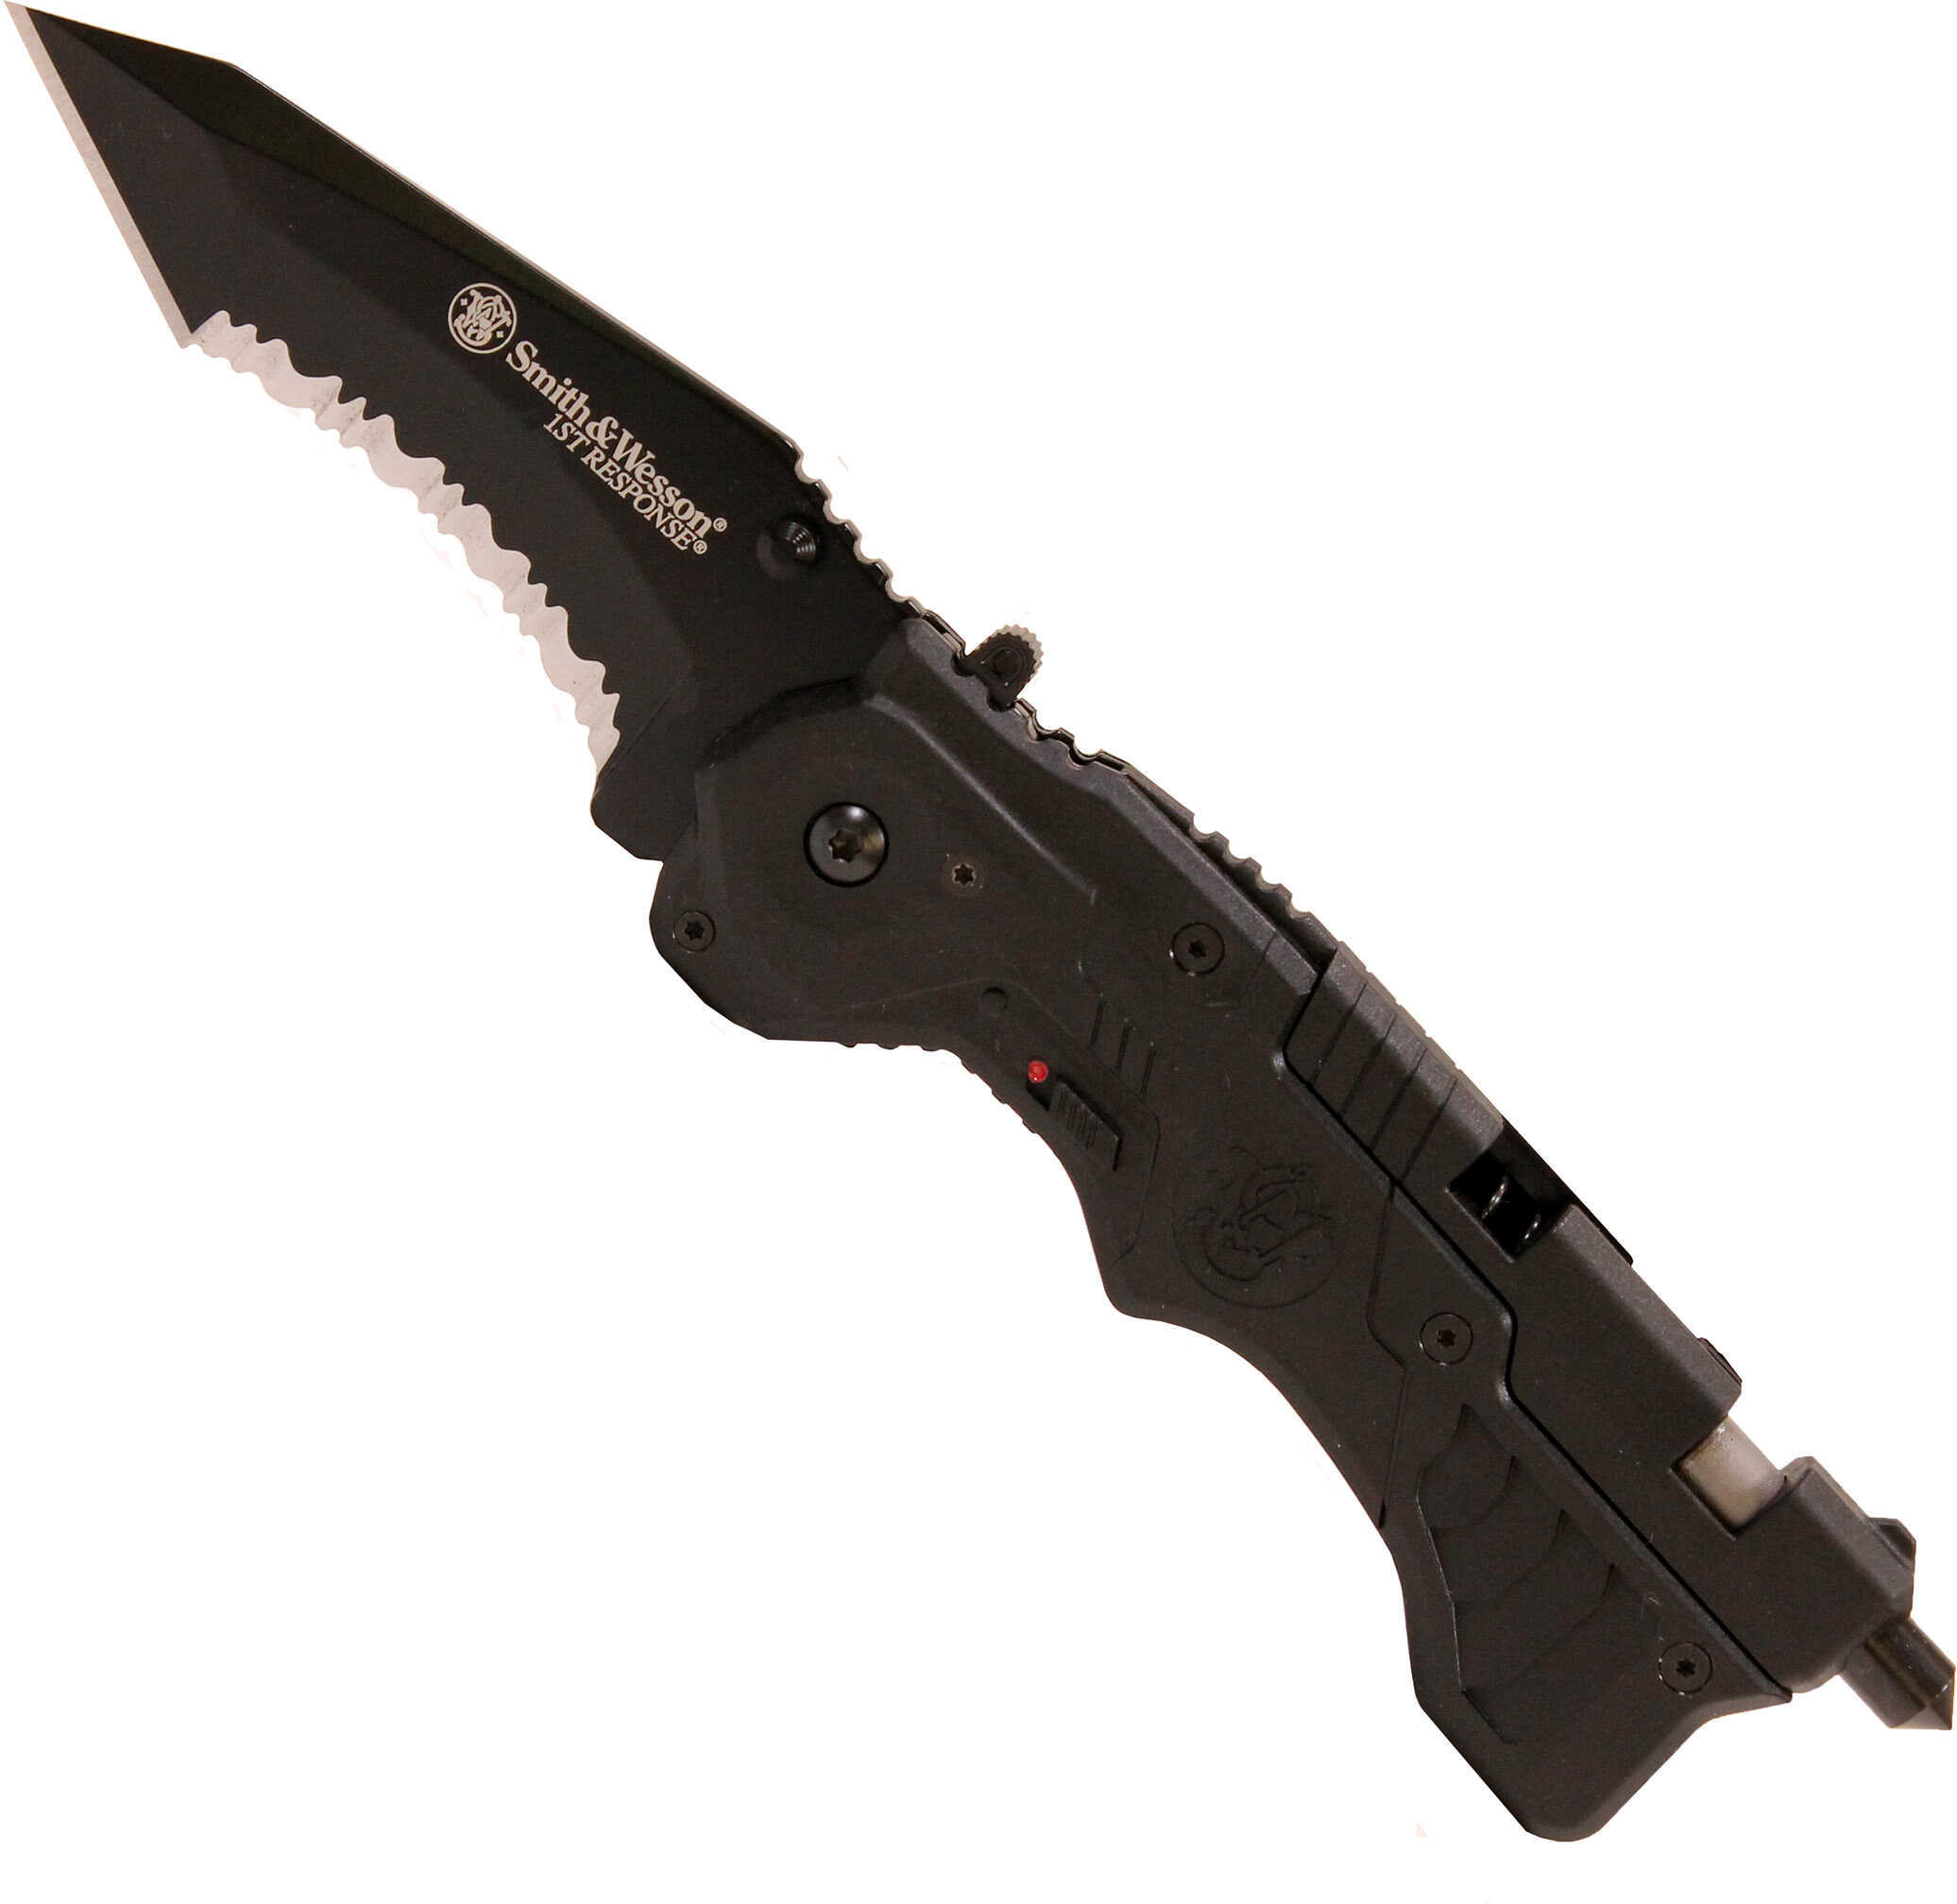 Smith & Wesson First Responder Black Magic Assisted Knife